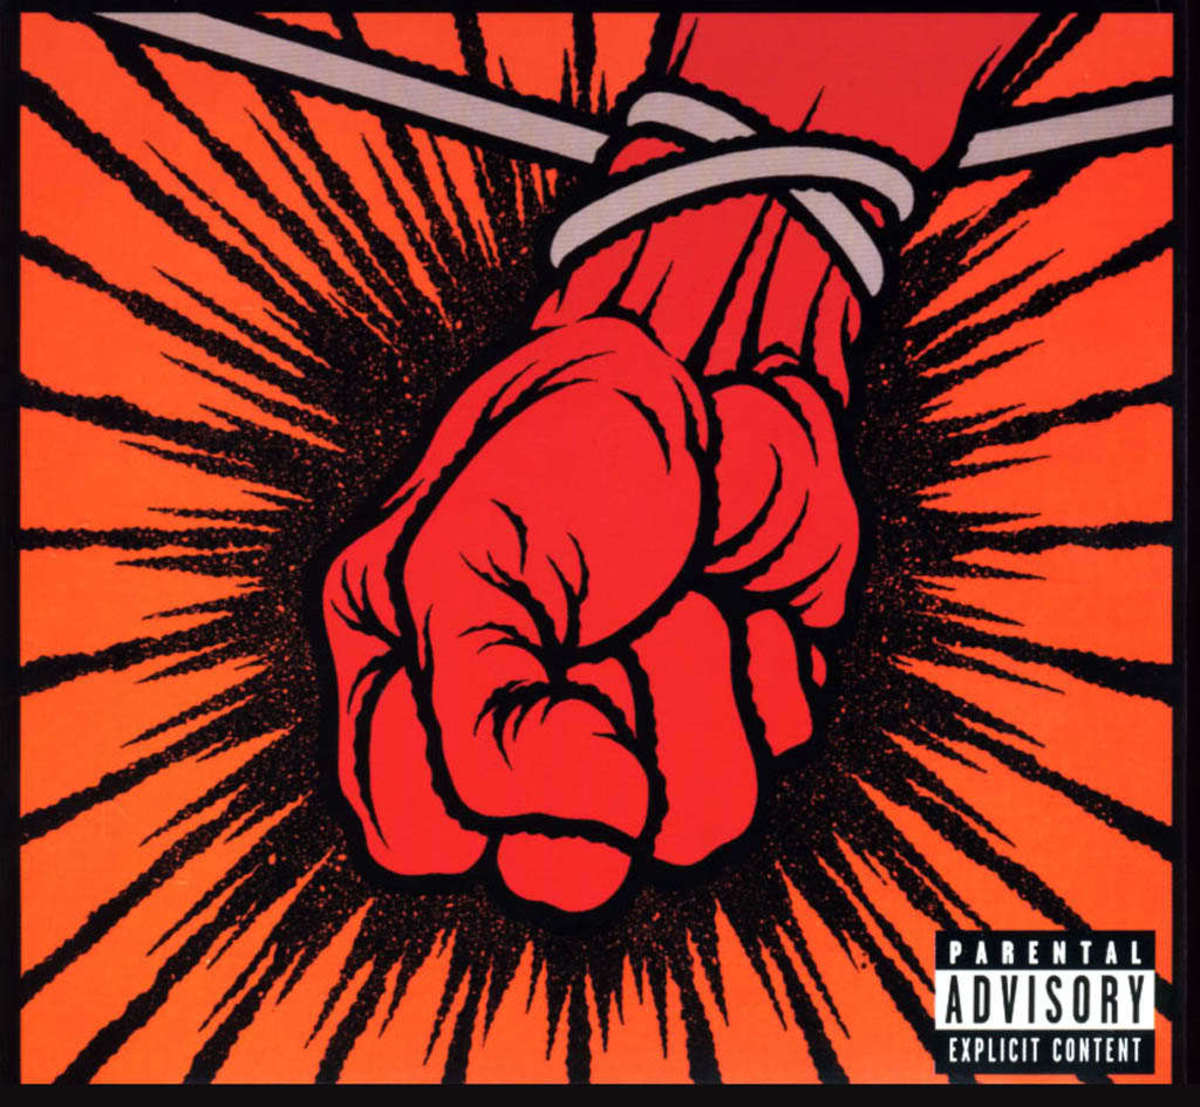 metallica-st-anger-the-great-and-not-so-great-aspects-of-the-album-as-written-by-a-longtime-heavy-metal-fan